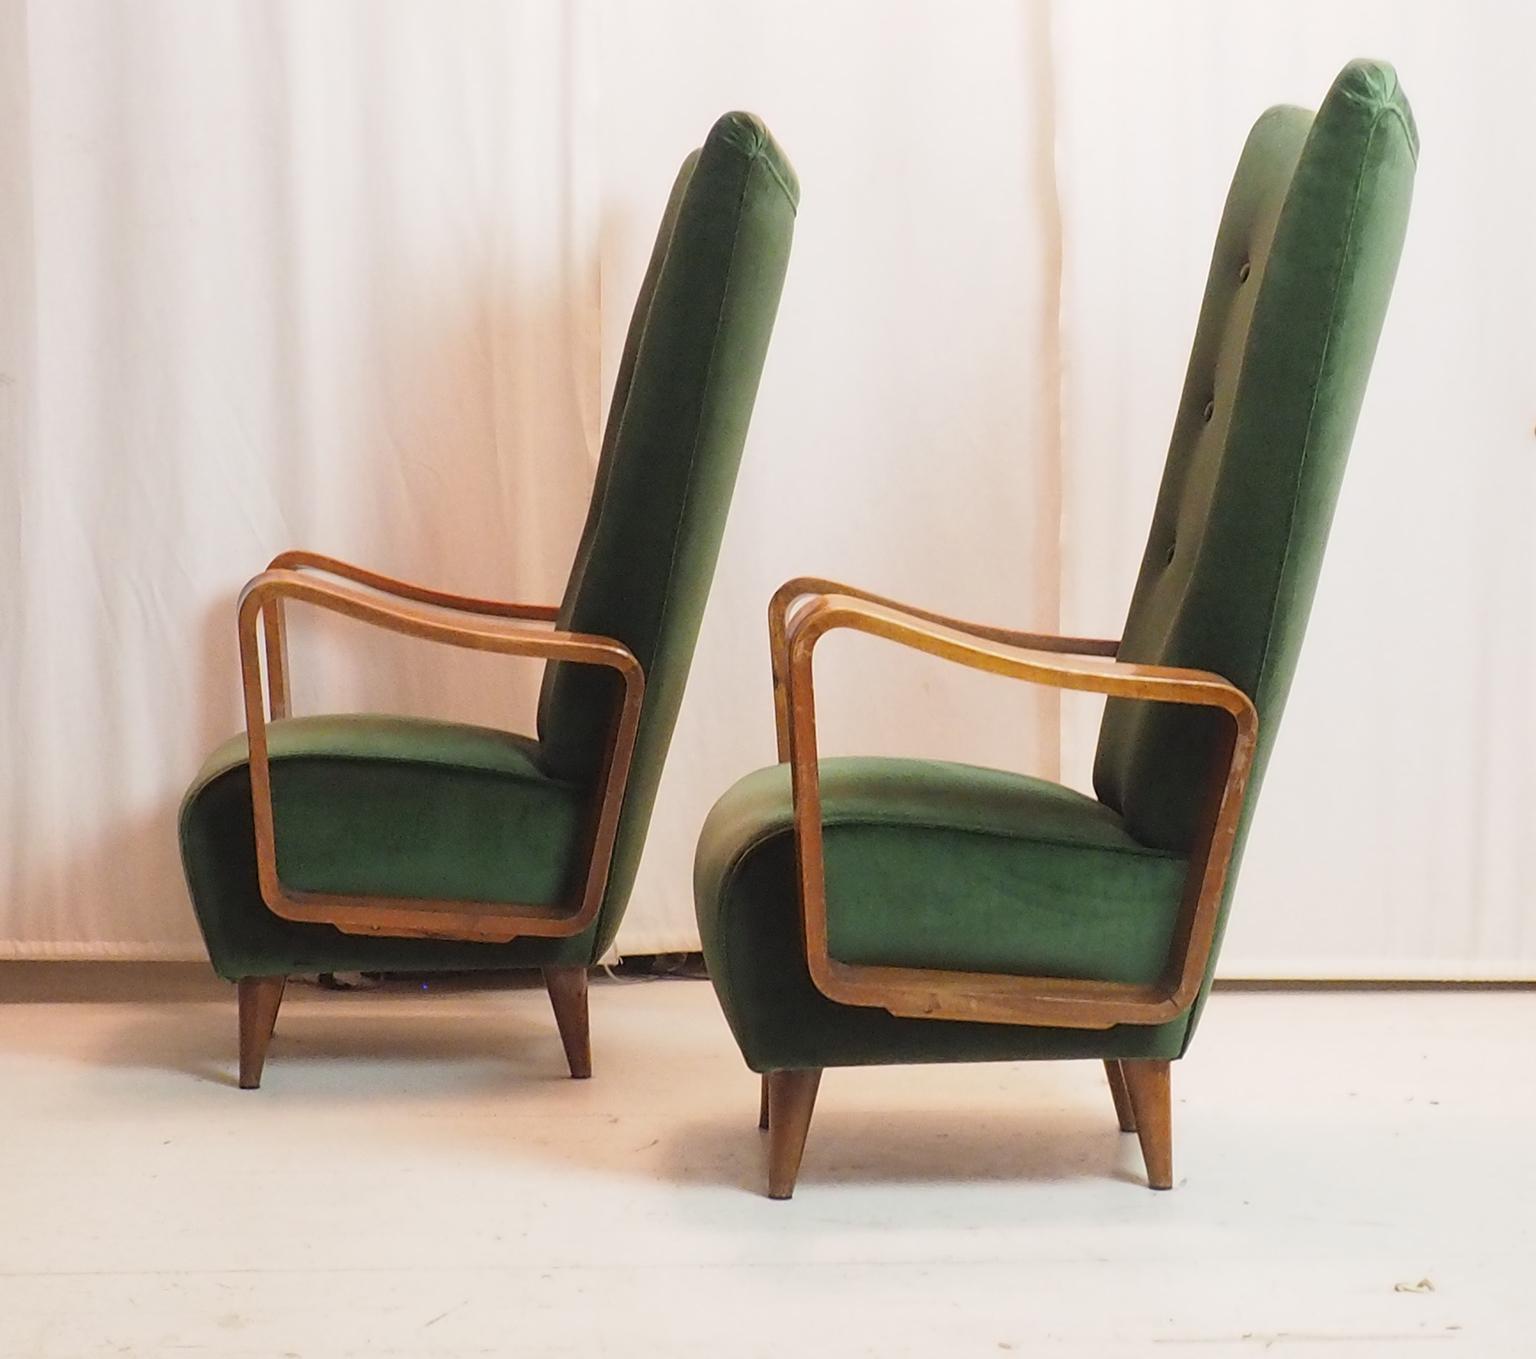 Mid-20th Century Midcentury High Back Italian Green Armchairs by Pietro Lingeri, Italy 1950s For Sale